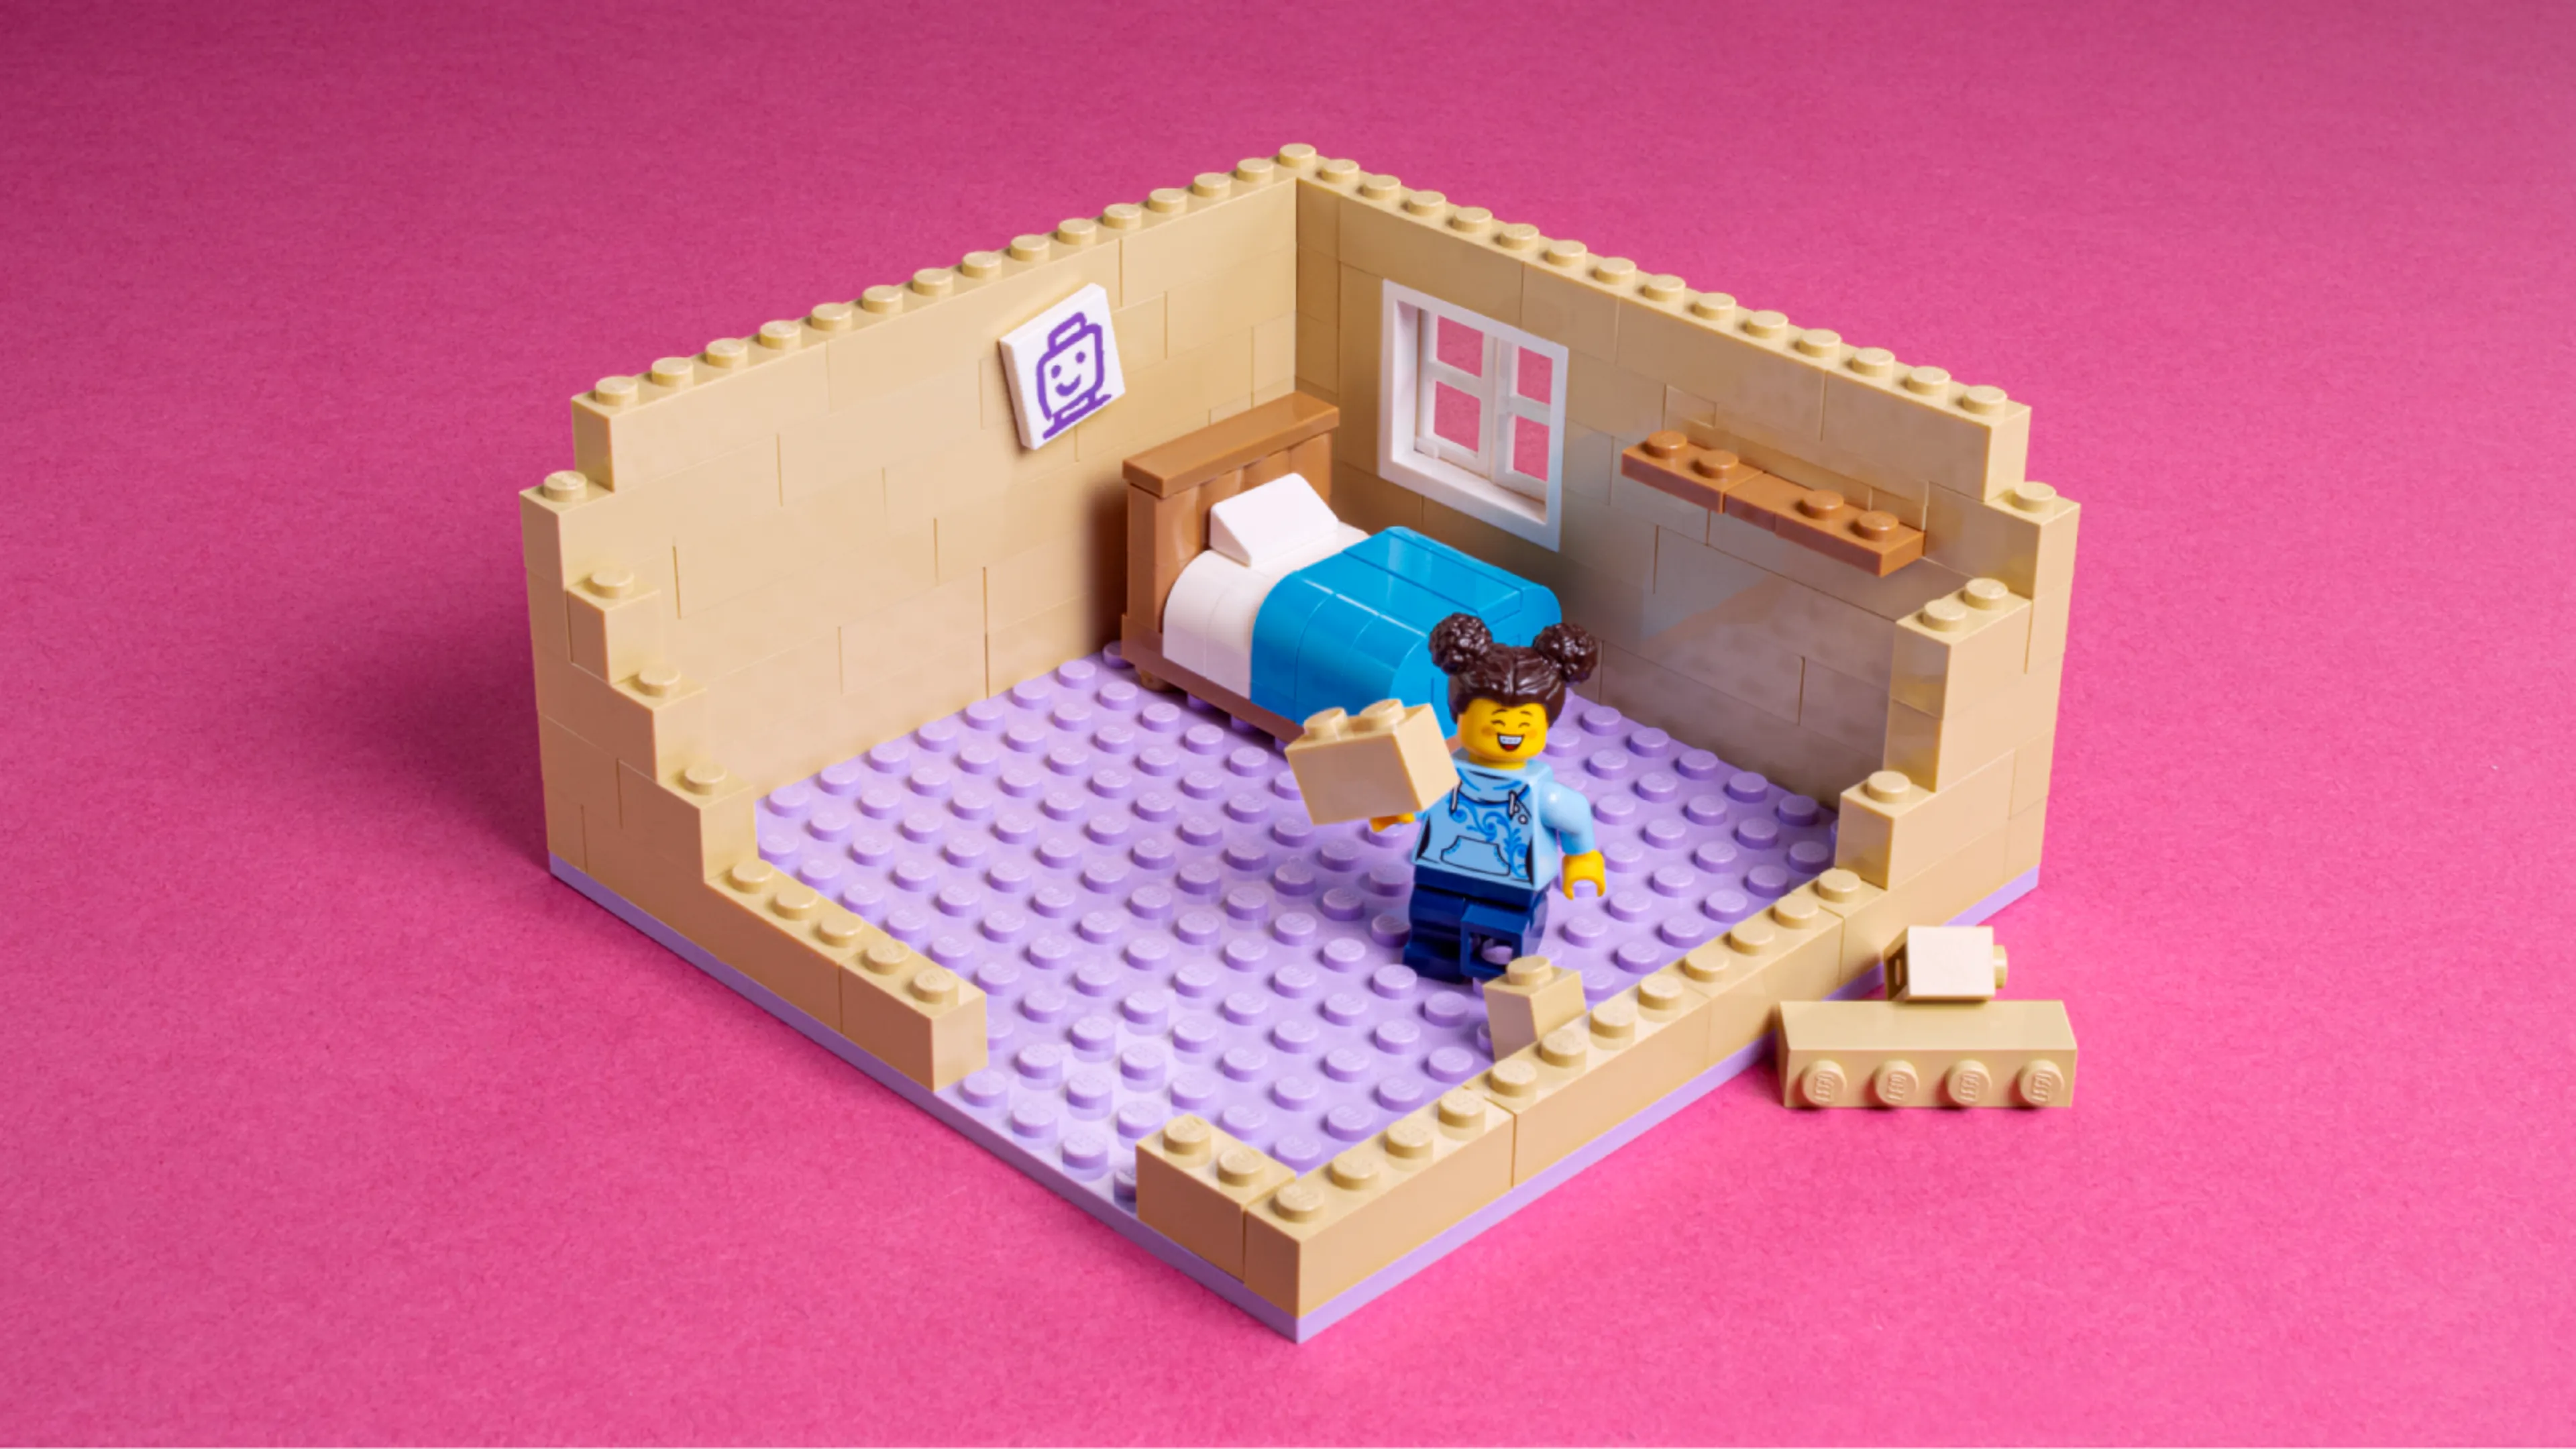 A minifigure standing next to a LEGO bed in an unfinished LEGO bedroom